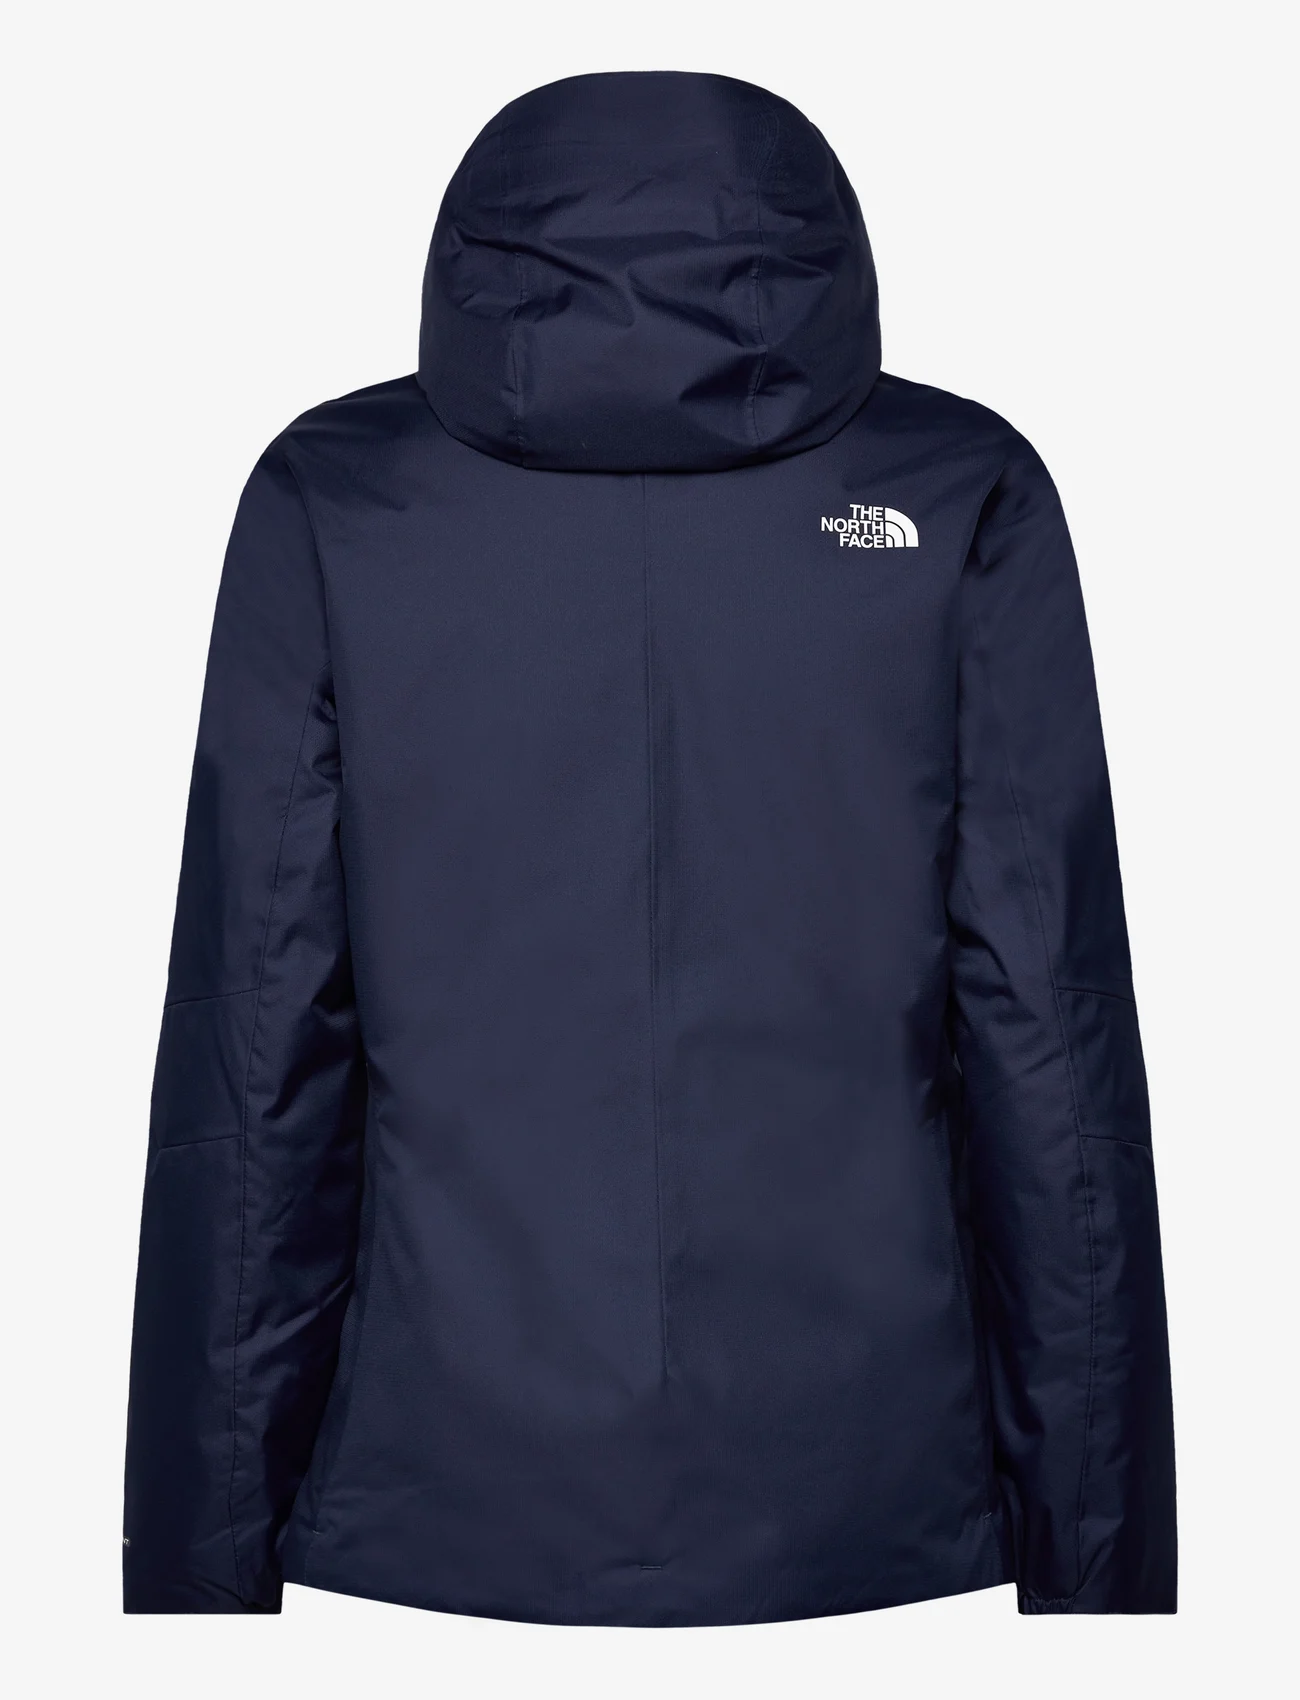 The North Face - W QUEST INSULATED JACKET - EU - outdoor & rain jackets - summit navy - 1